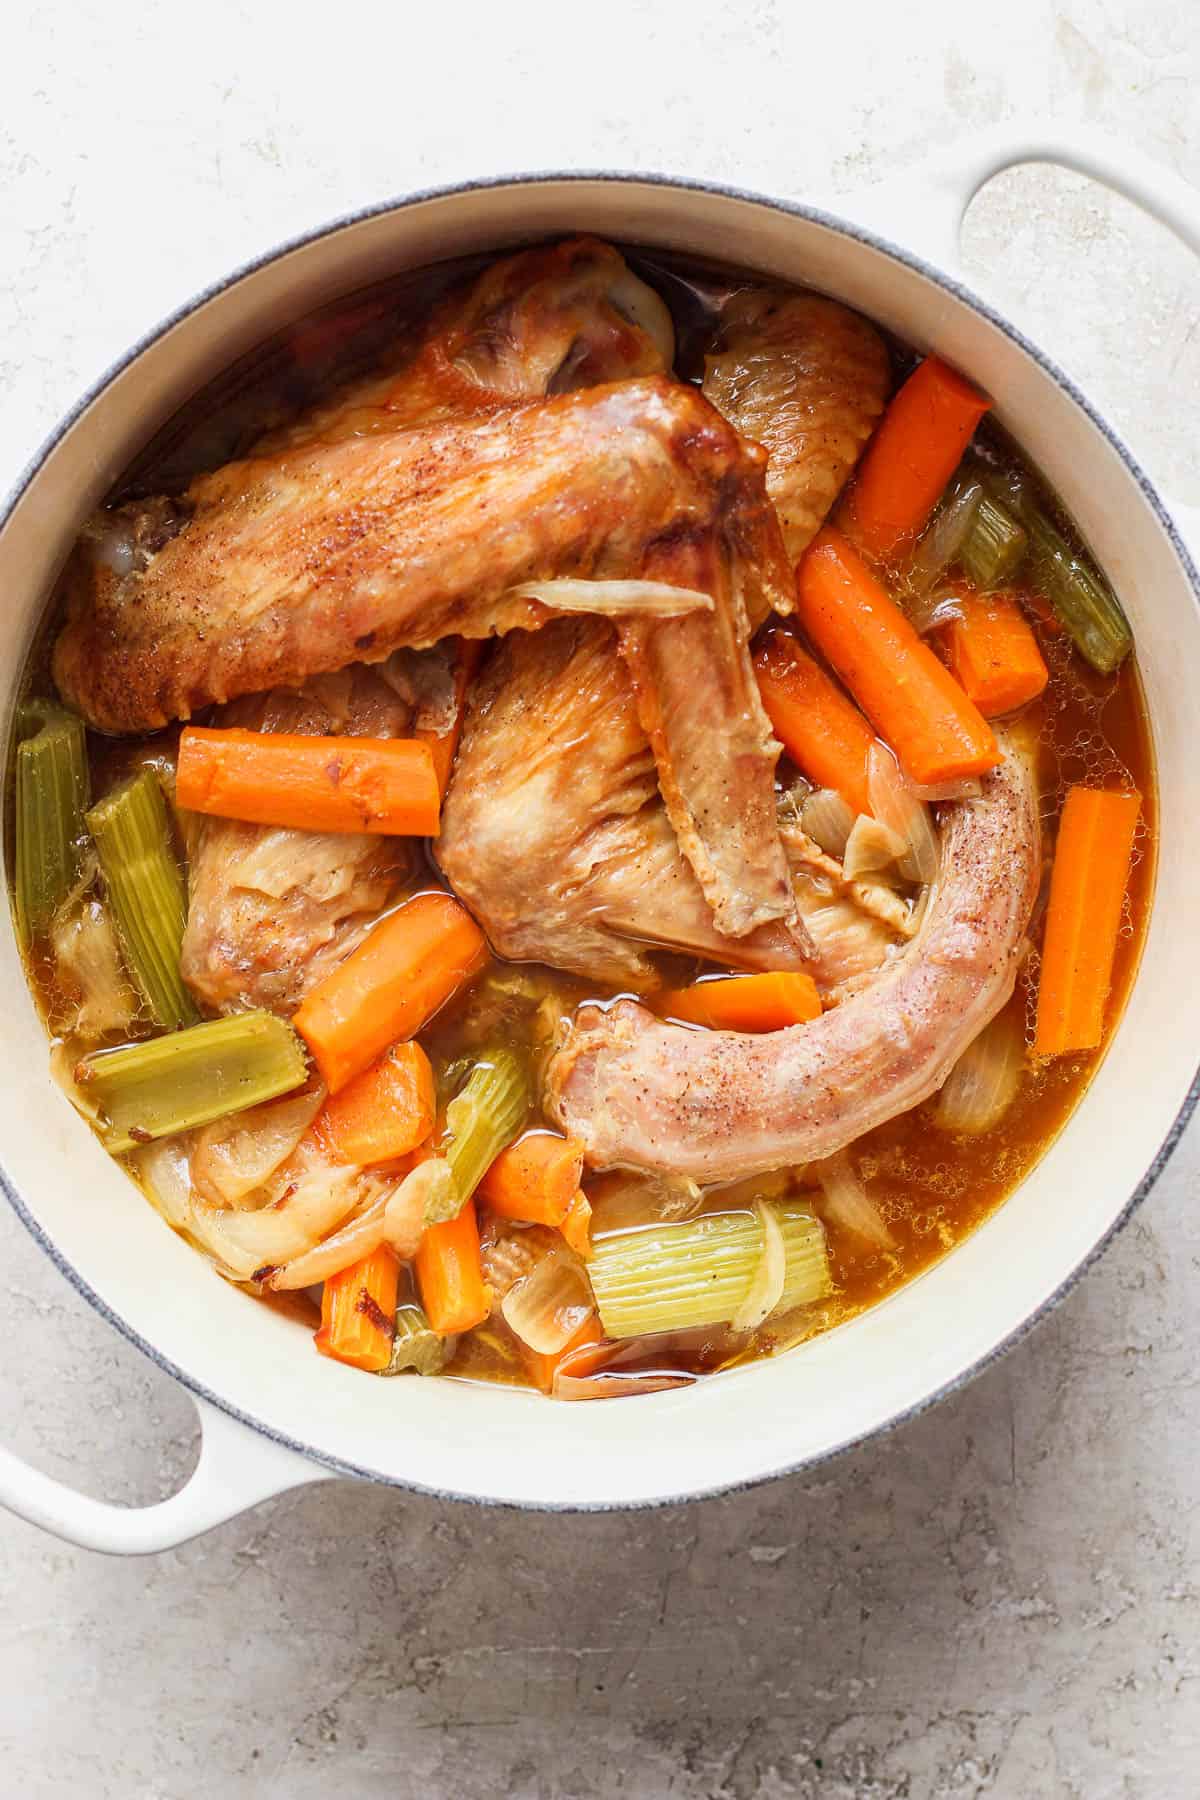 Turkey parts, roasted veggies, and turkey stock in a dutch oven.